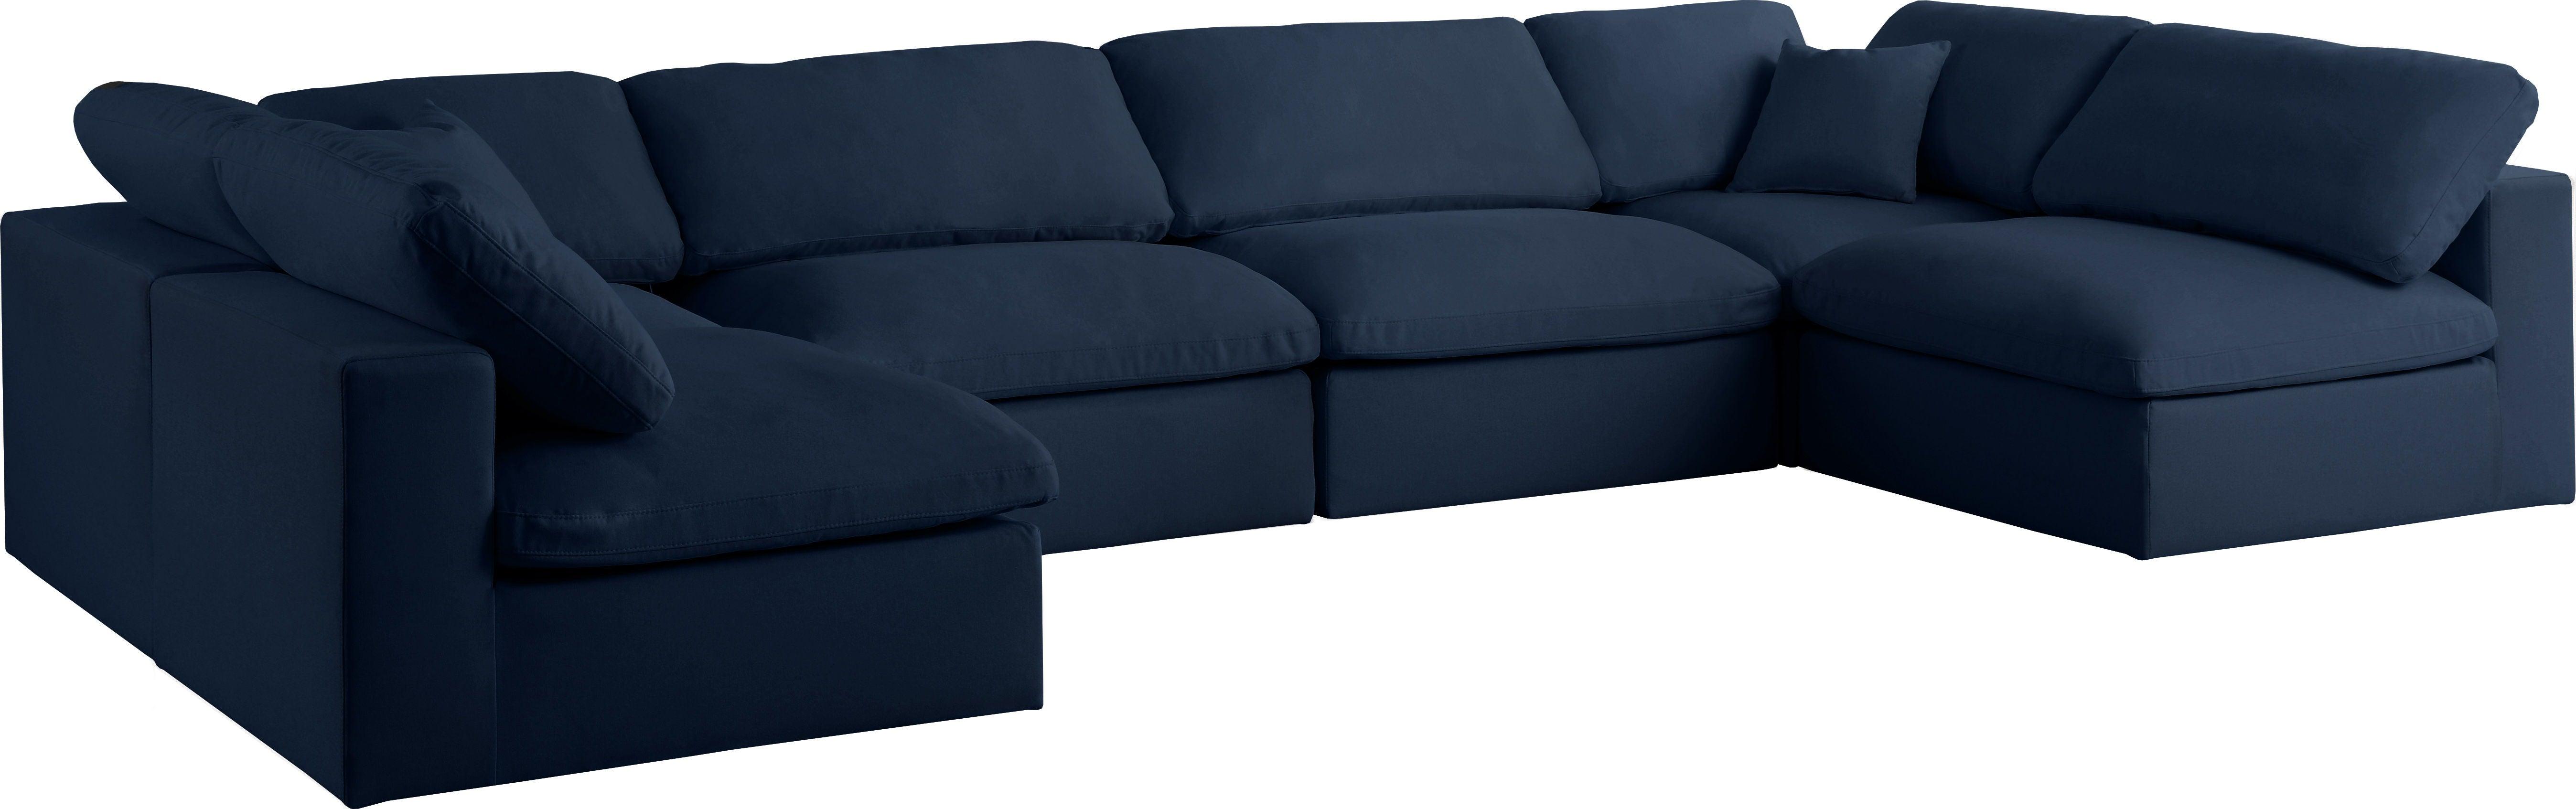 Meridian Furniture - Serene - Textured Fabric Deluxe Comfort Modular Sectional 6 Piece - Navy - Fabric - 5th Avenue Furniture